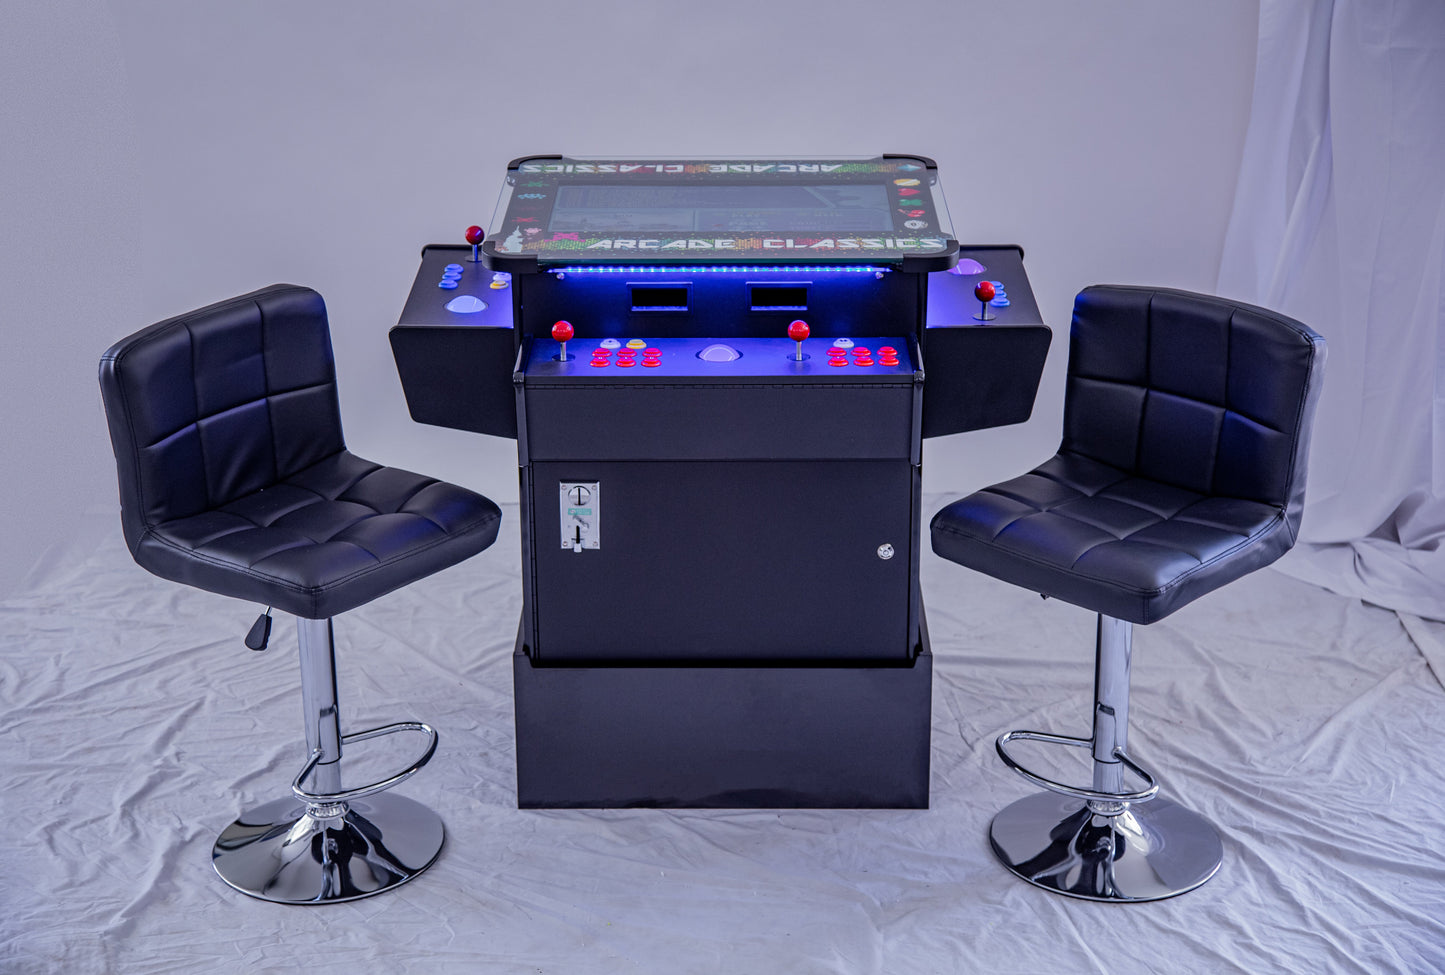 Full-sized, 3 Sided, Cocktail Table Arcade Game With 1,162 Classic, Golden Age, Retro Games, and Trackball